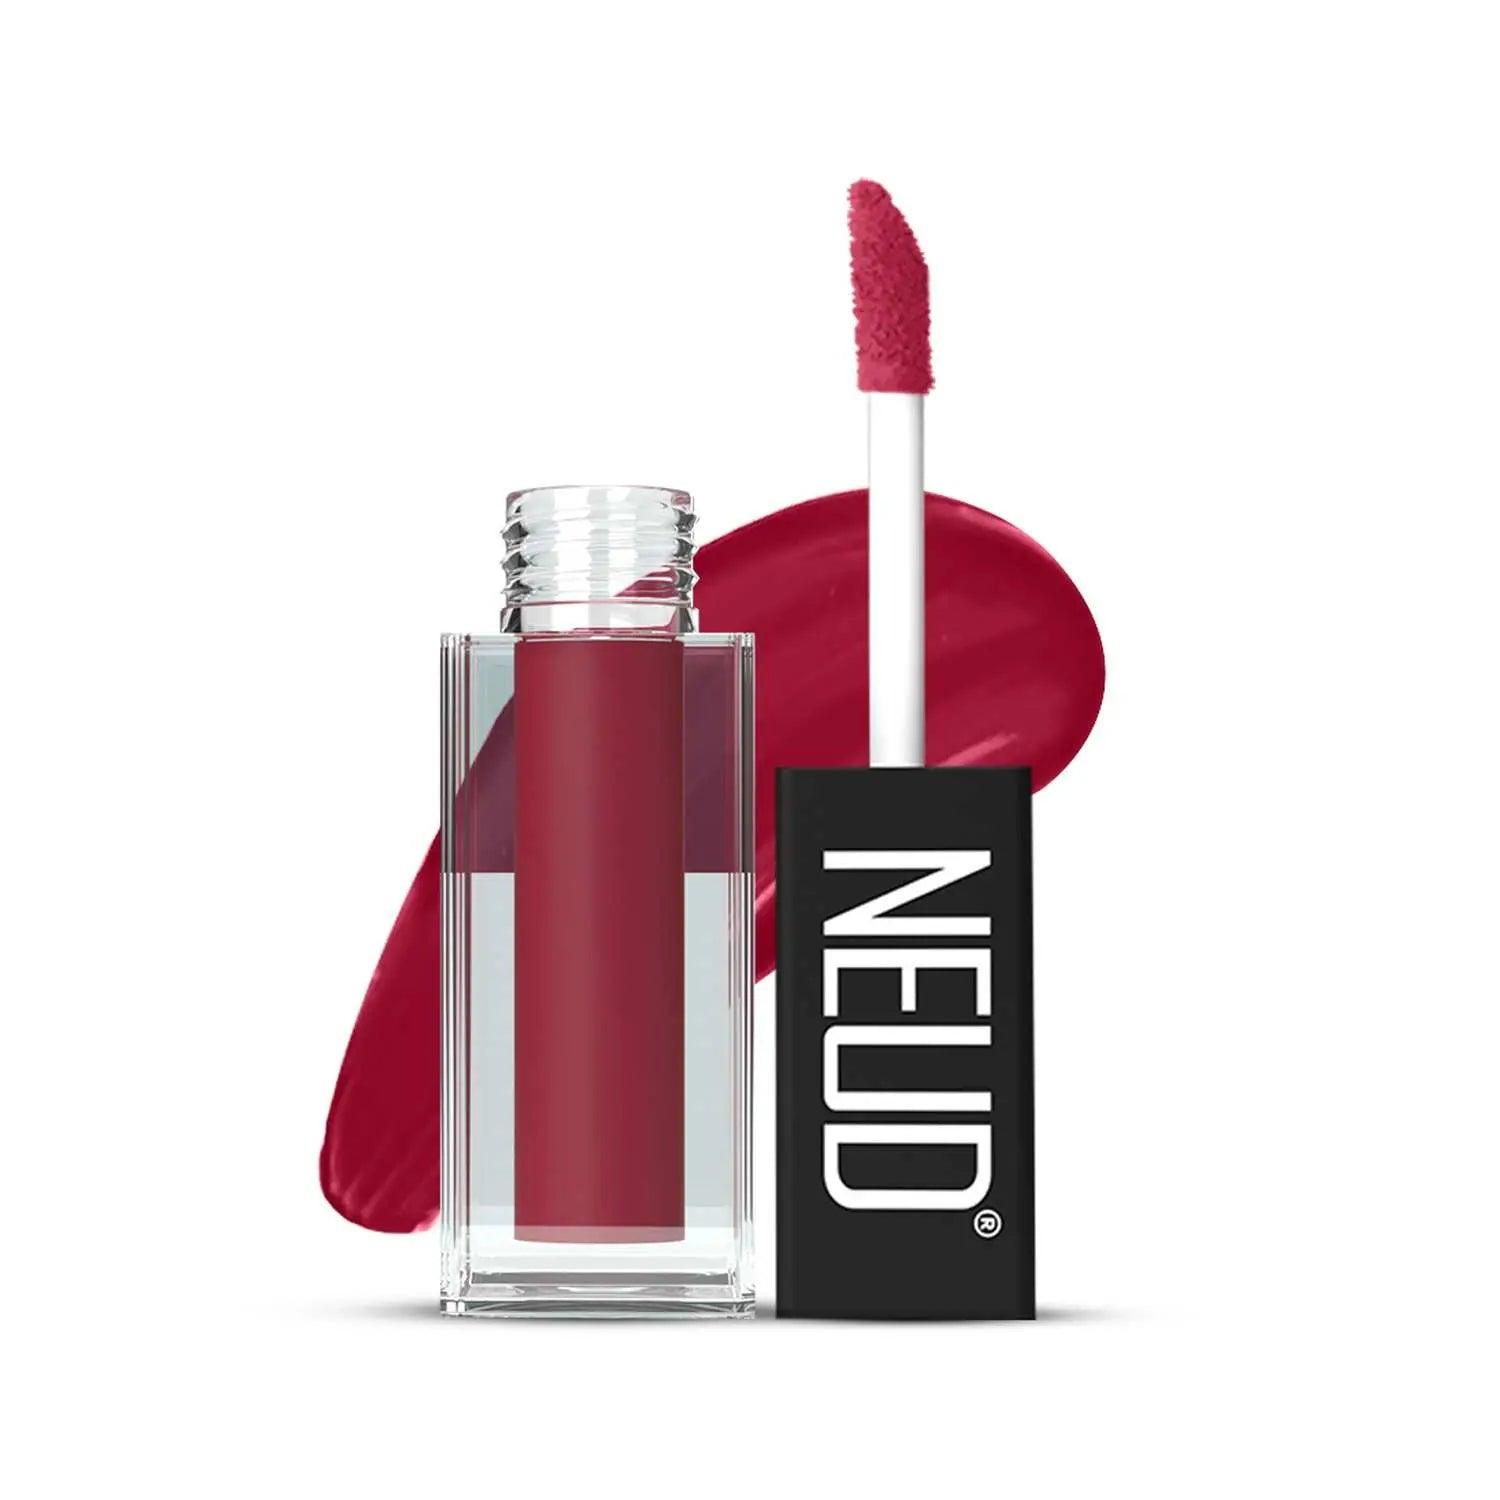 NEUD Matte Liquid Lipstick Peachy Pink with Jojoba Oil, Vitamin E and Almond Oil - Smudge Proof 12-hour Stay Formula with Free Lip Gloss